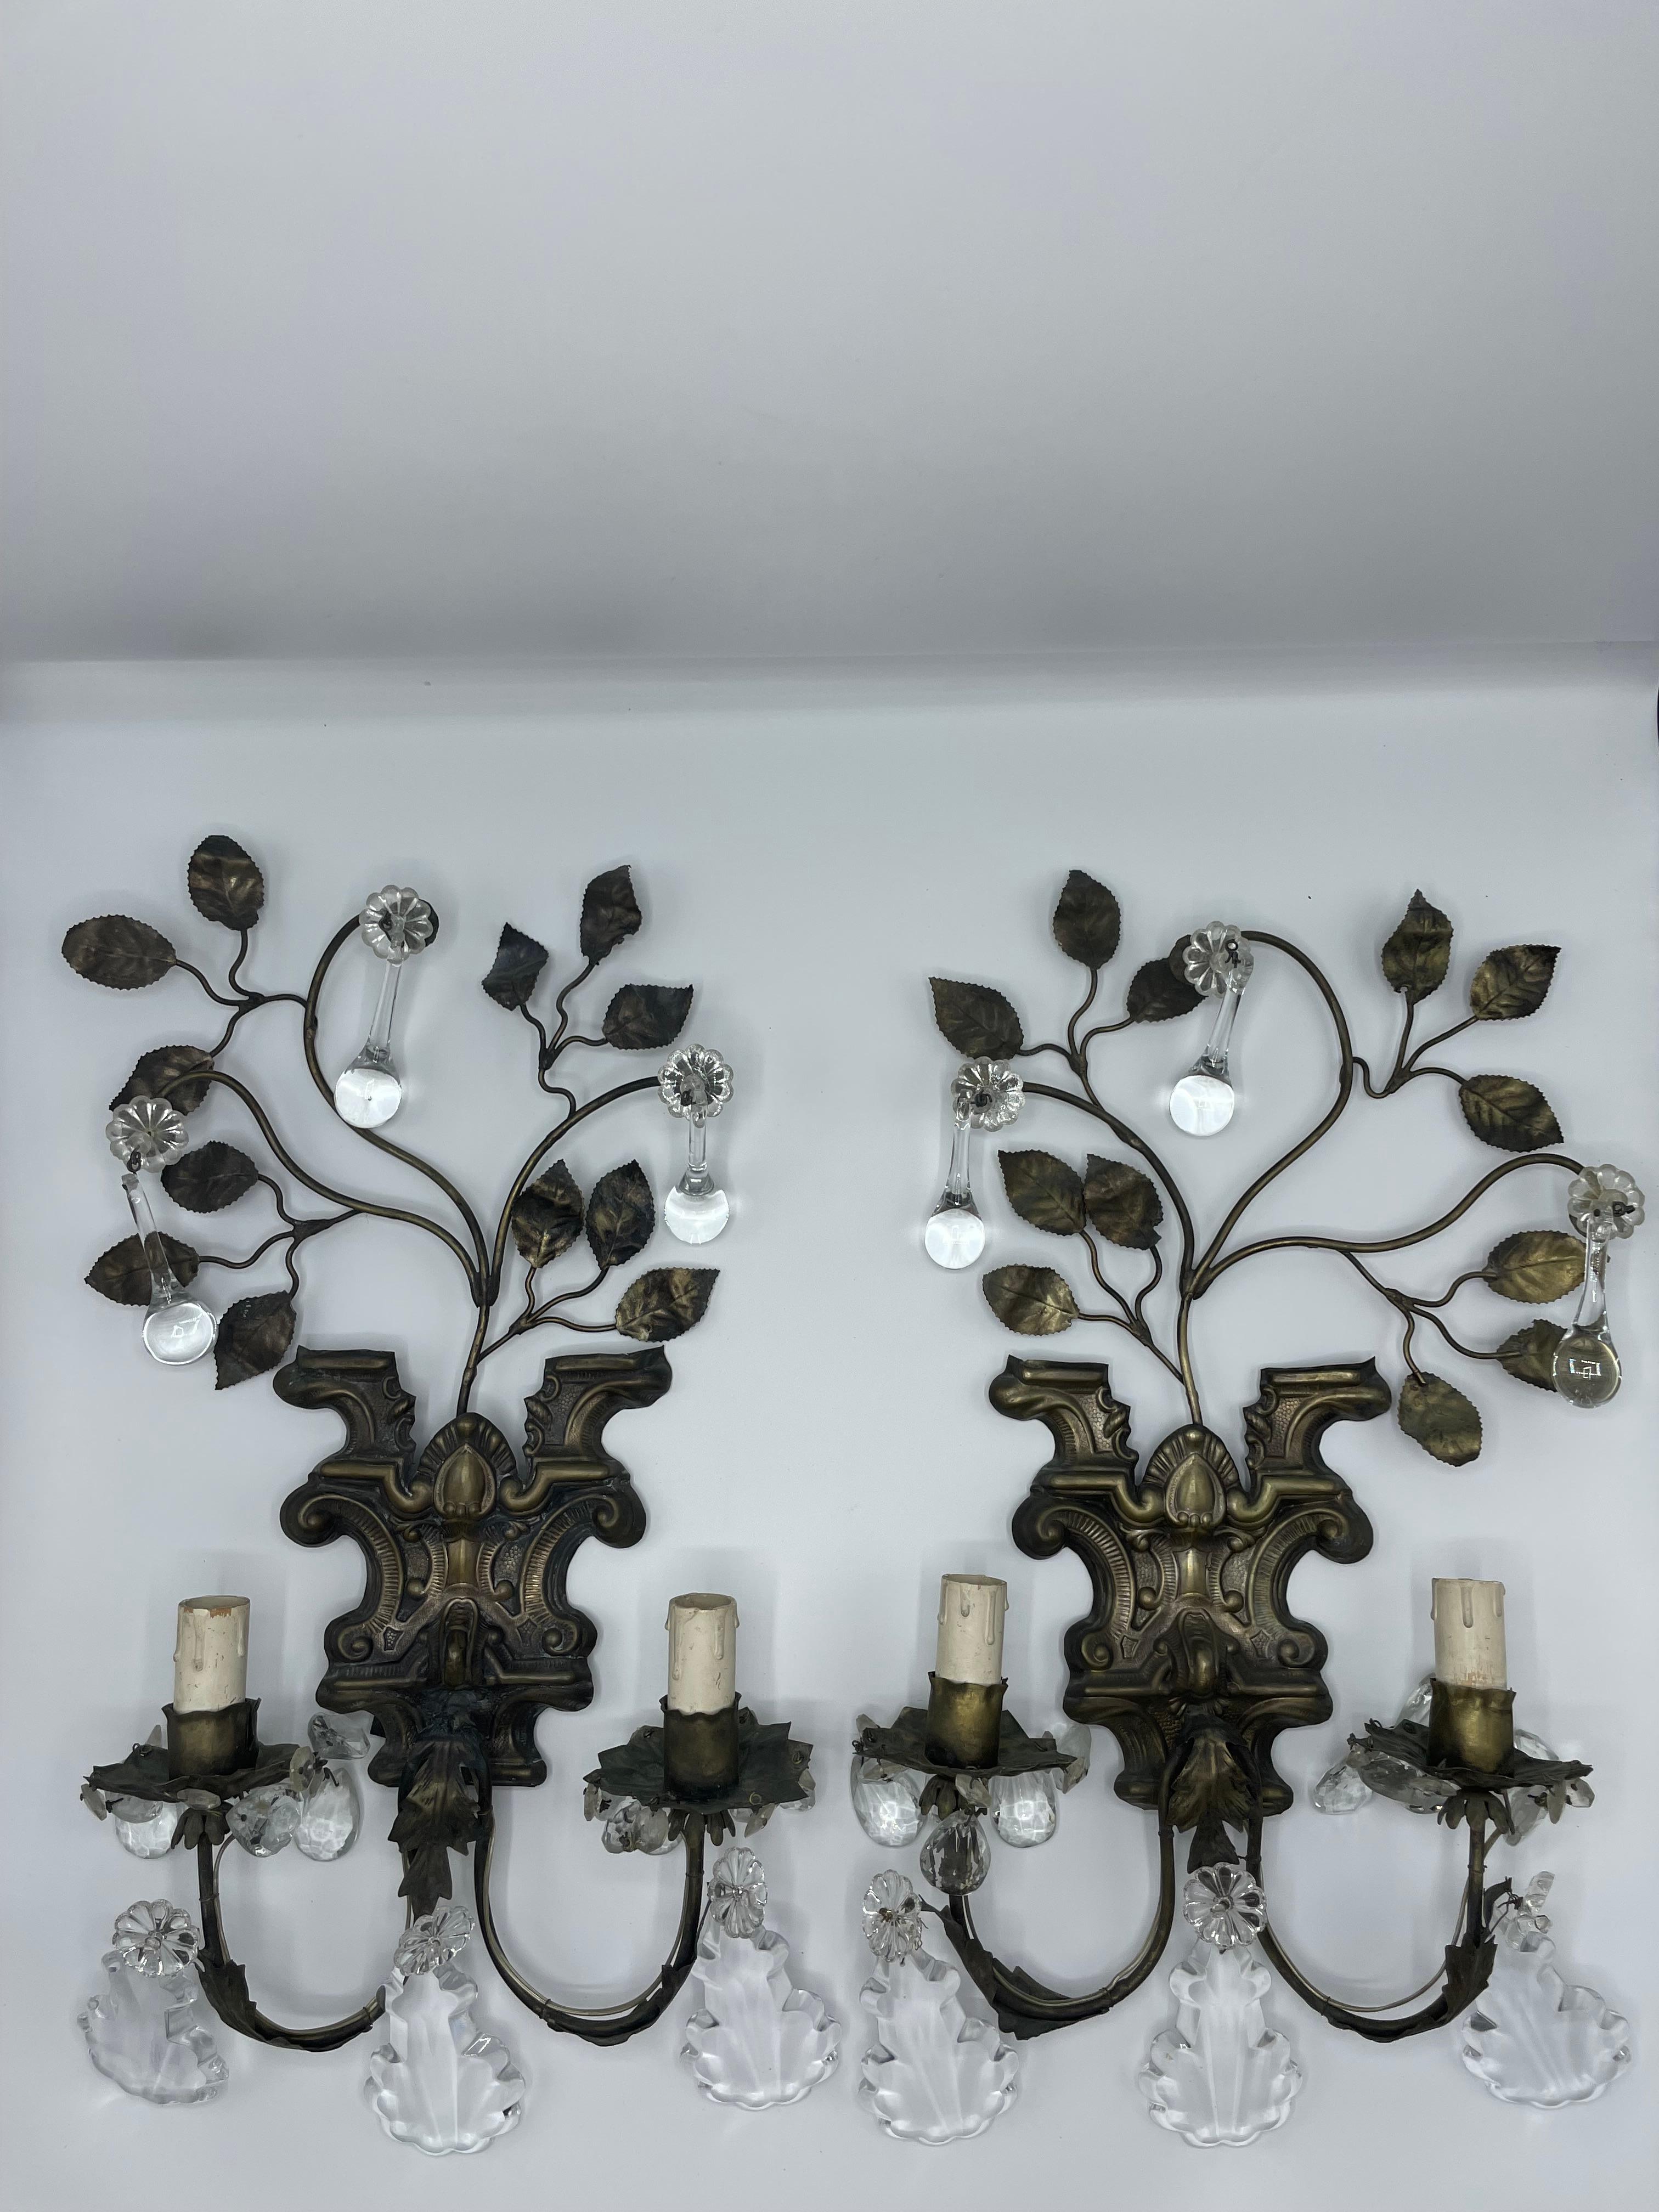 Pair of French wall lamps repoussé tole from the end of the 19th century, has two lights.
Branches with trimmed foliage are attached to a base with decorative reliefs. Droplet-shaped tassels hang from the thin leaves. Two arms of light with heavy